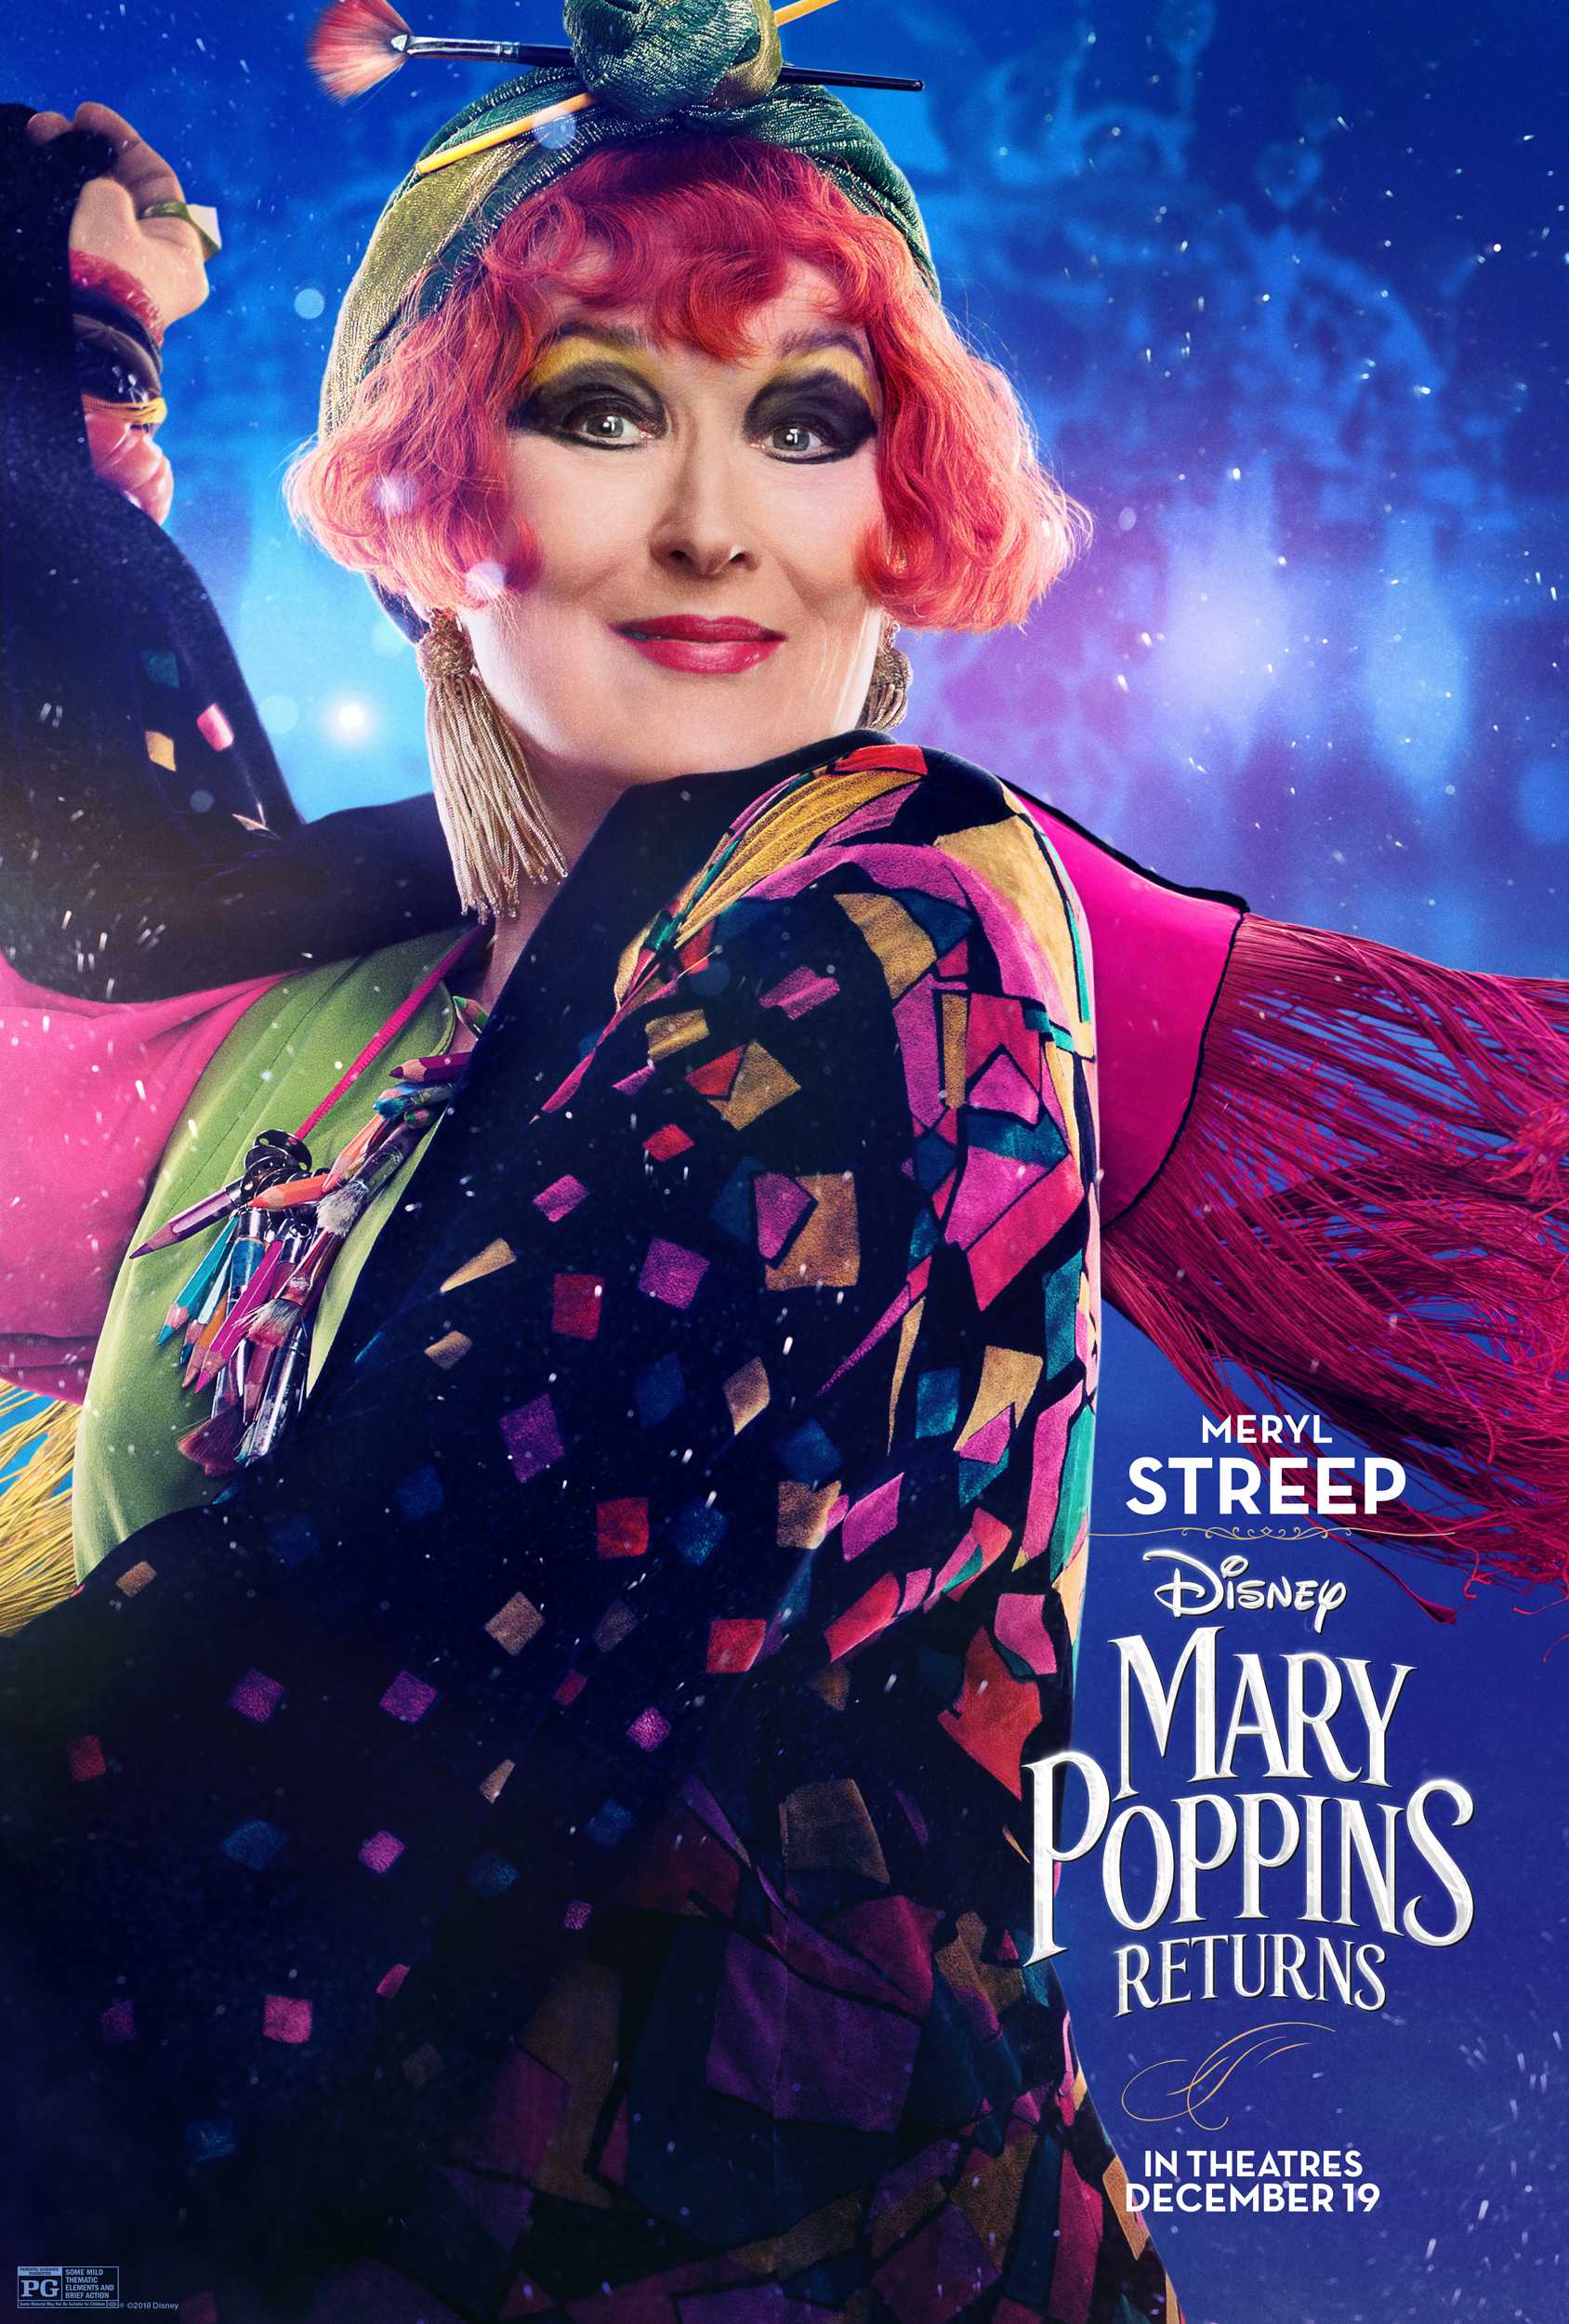 Disney's Mary Poppins Returns Sneak Peak And Character Movie Posters